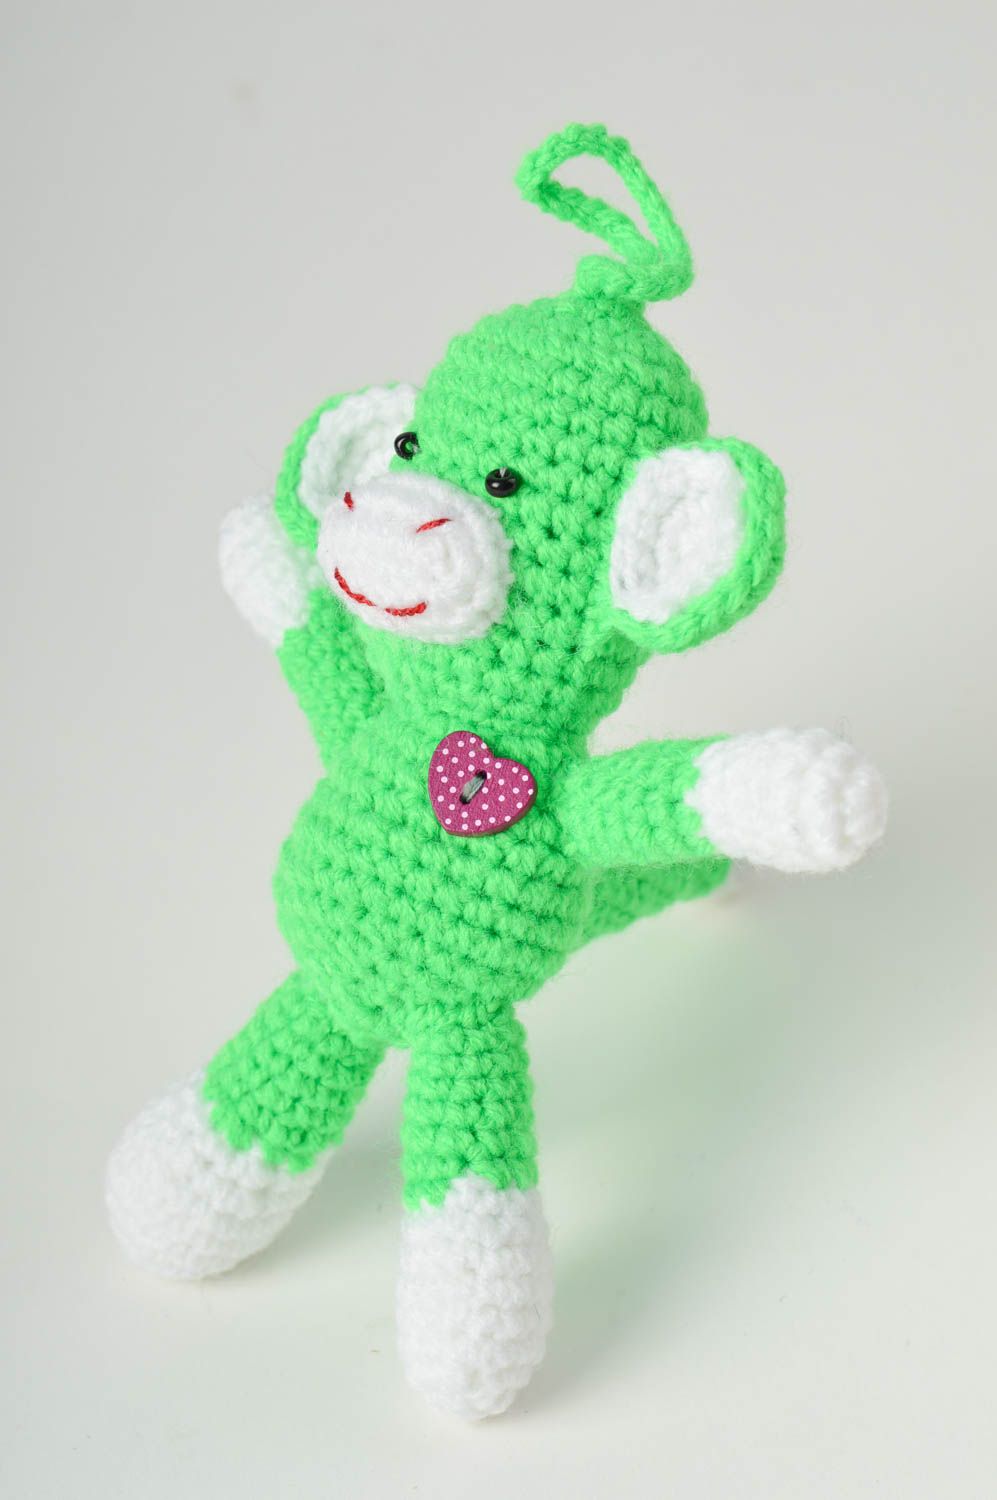 Handmade cute crocheted toy interior decor hand-crocheted toy for children photo 2